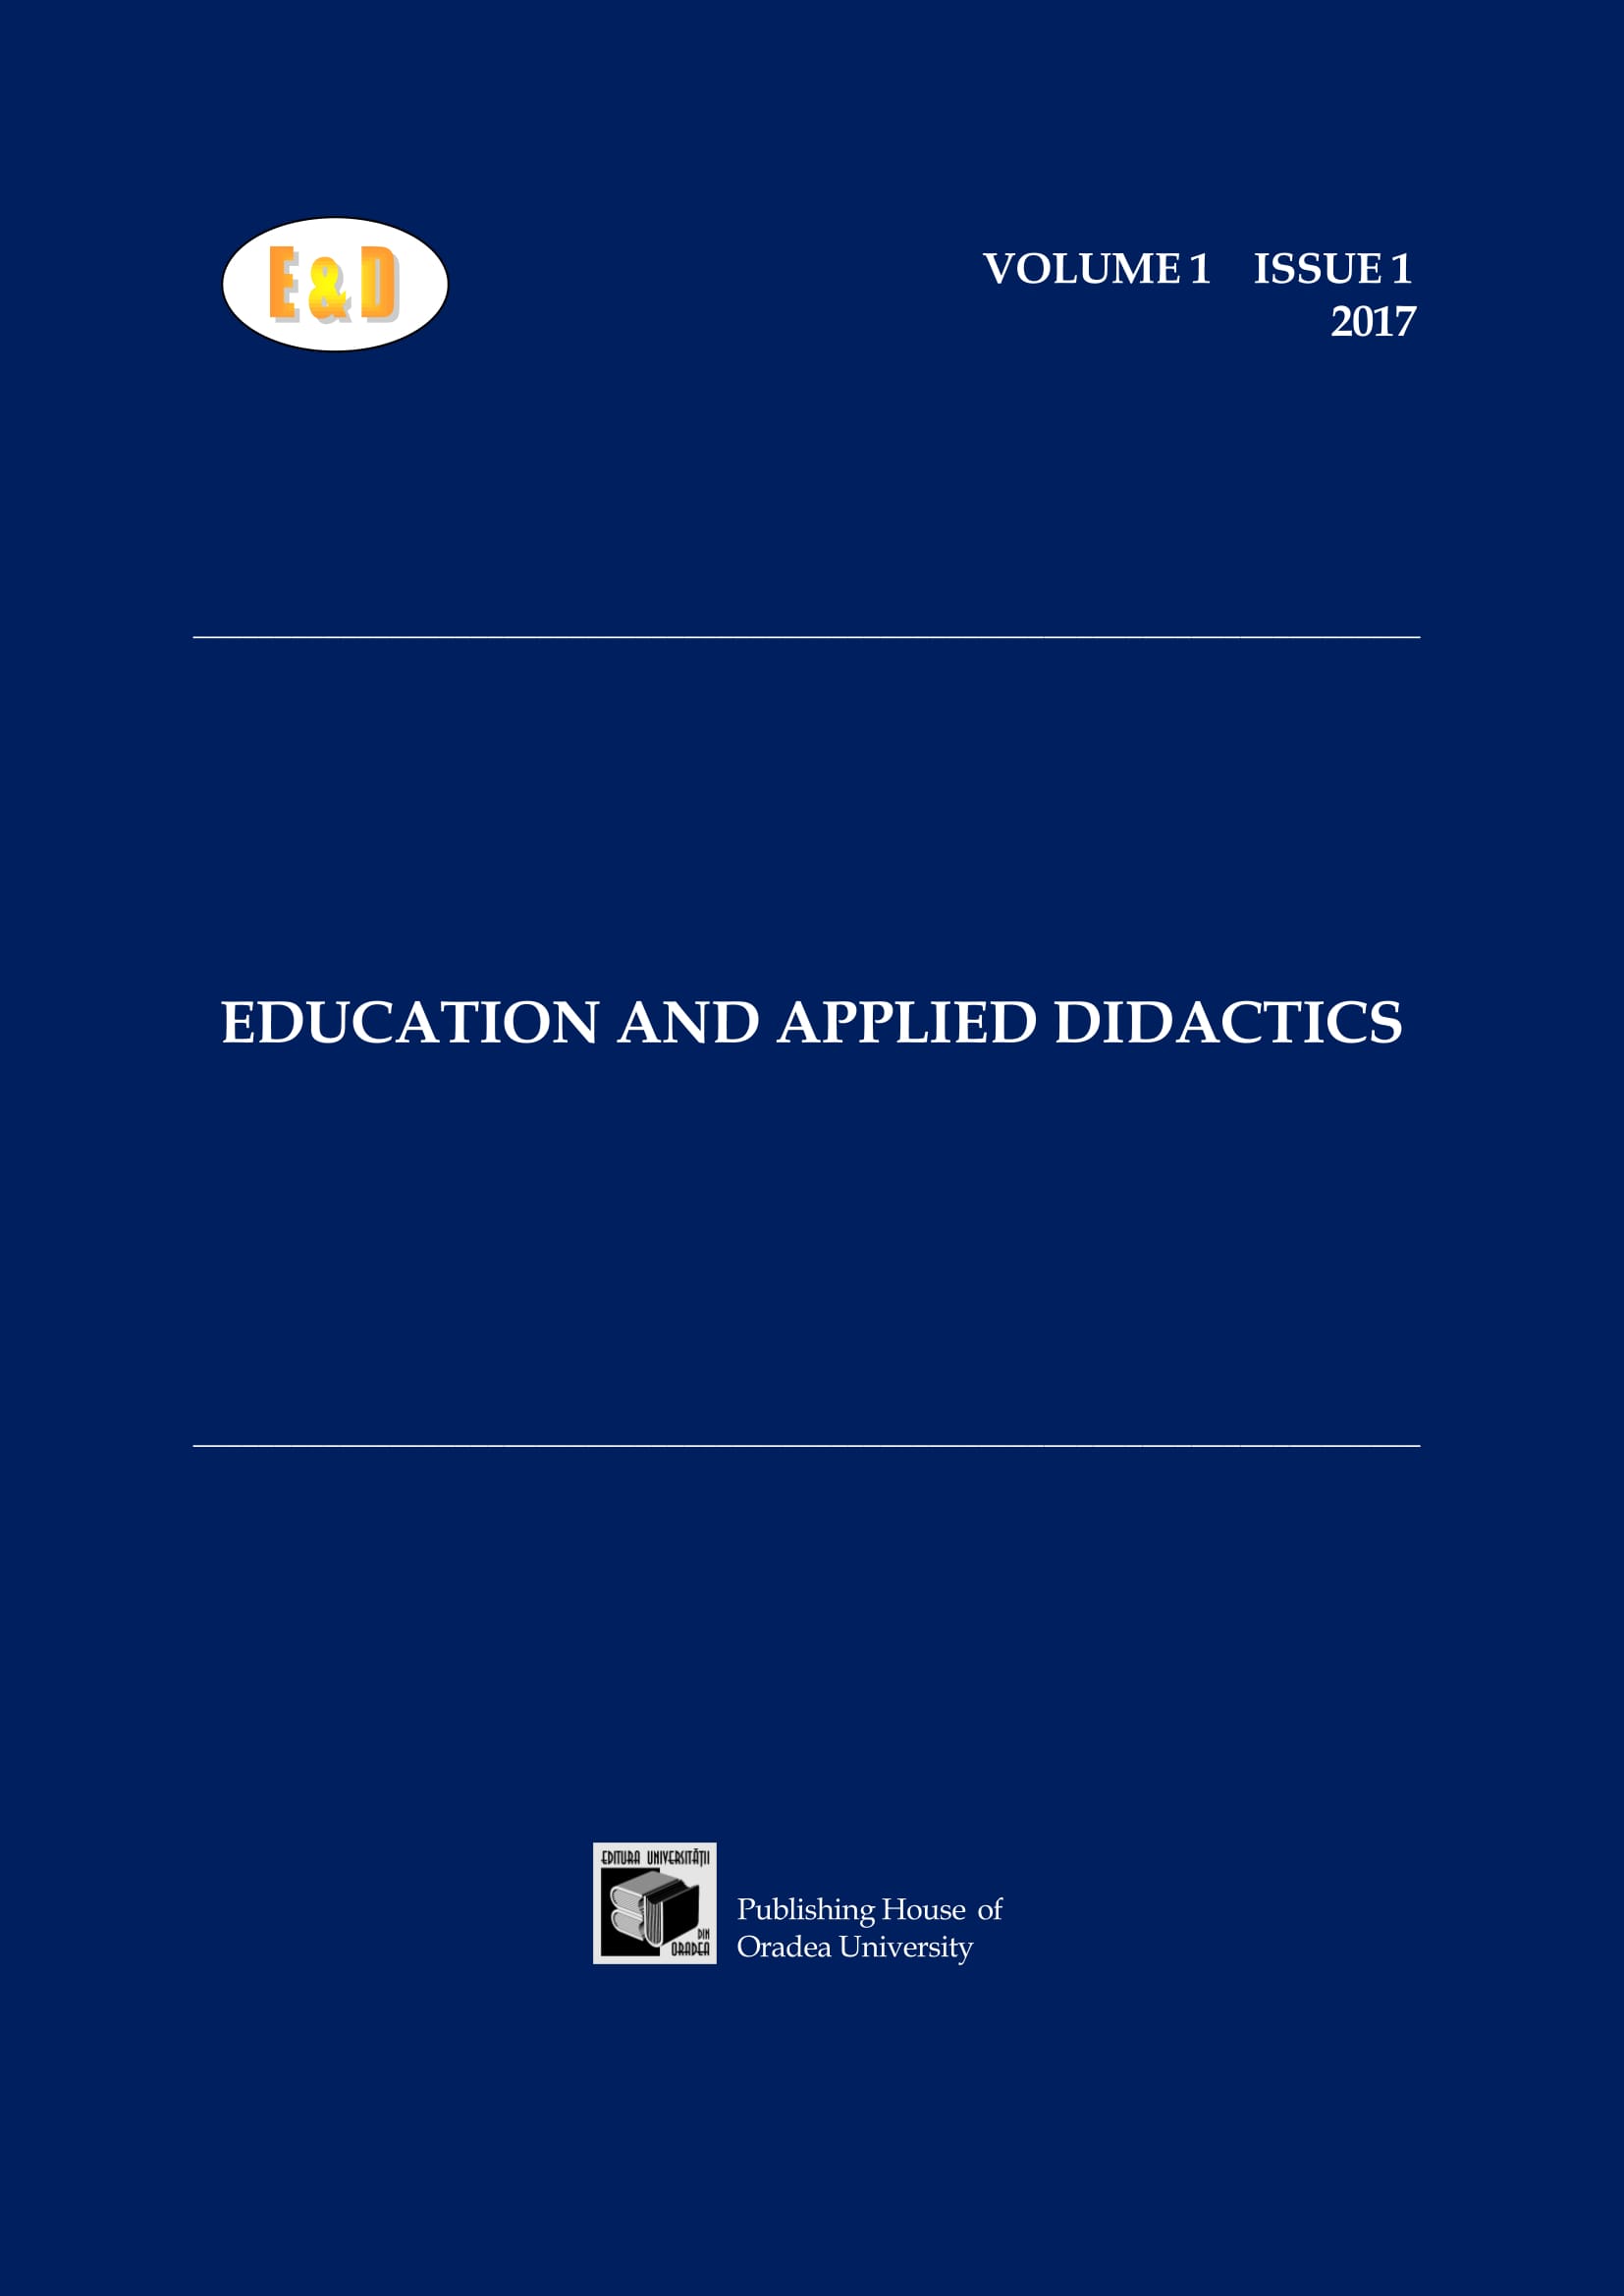 THE STUDENT PERCEPTION ON THE SOCIAL MISSION OF VOCATIONAL SCHOOLS FROM THE ROMANIAN SYSTEM OF EDUCATION Cover Image